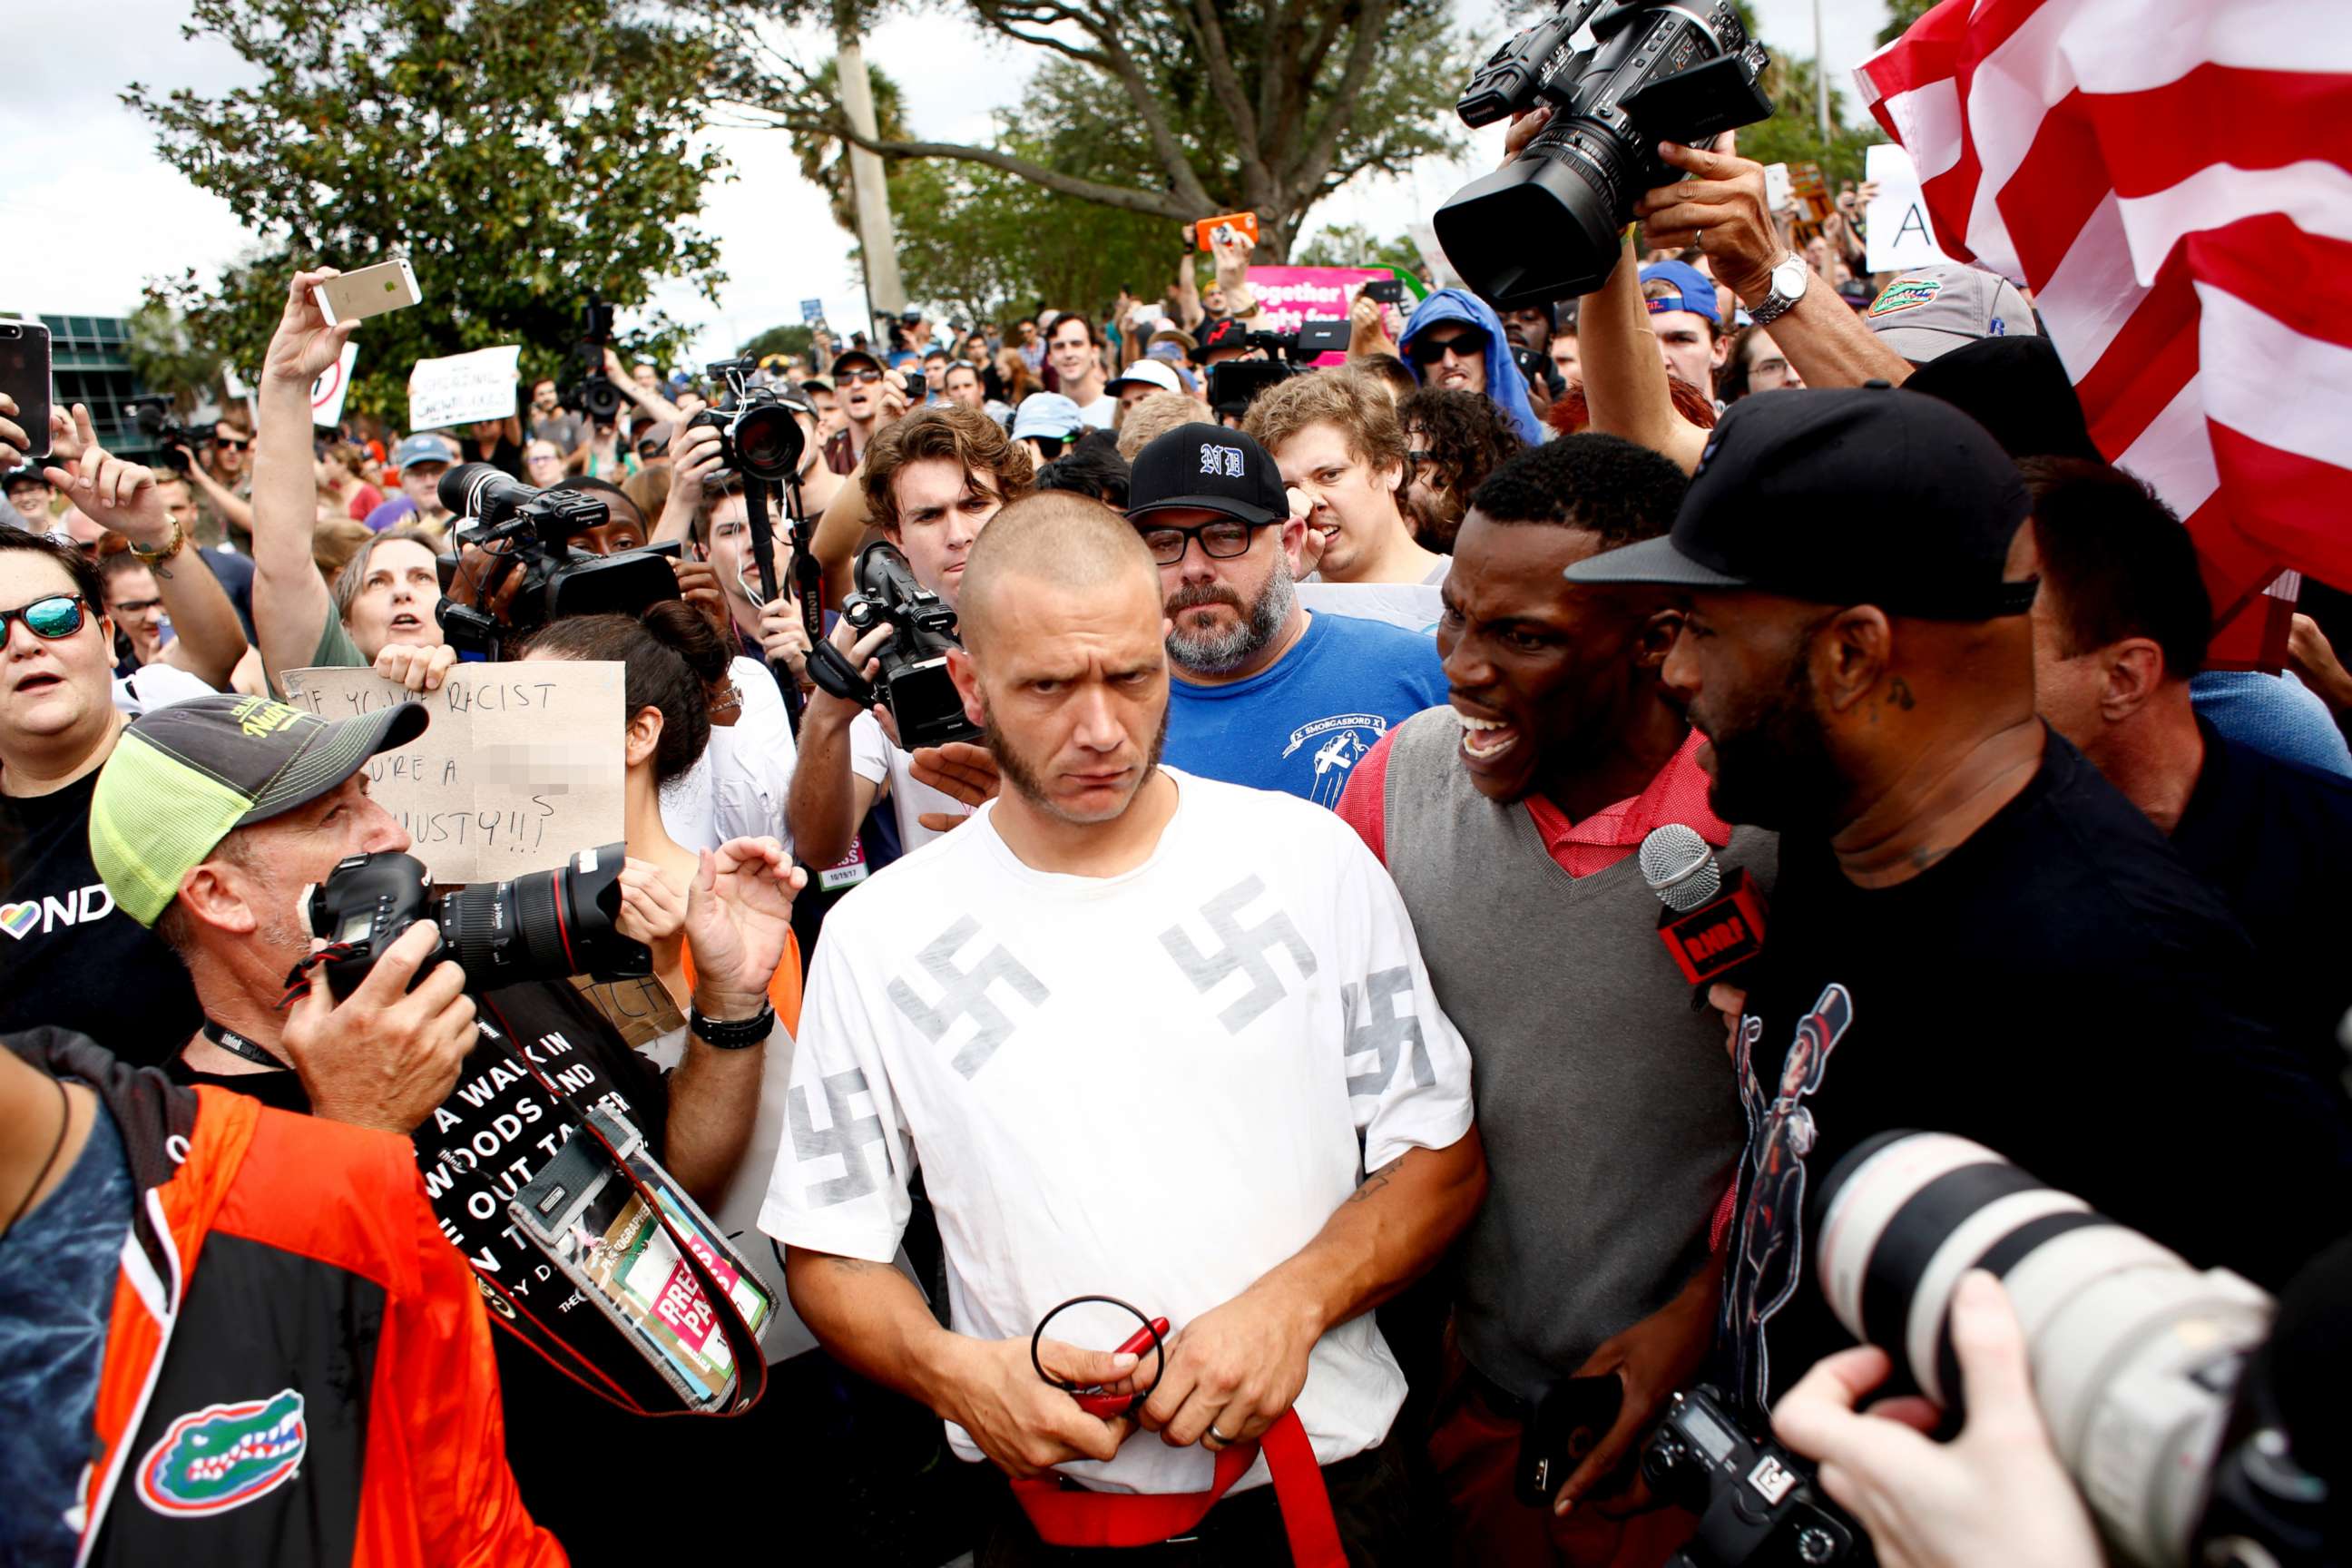 PHOTO: A man wearing a shirt with swastikas is forced away from the scene by the crowd near the site of a planned speech by white nationalist Richard Spencer at the University of Florida campus, Oct. 19, 2017, in Gainesville, Florida.